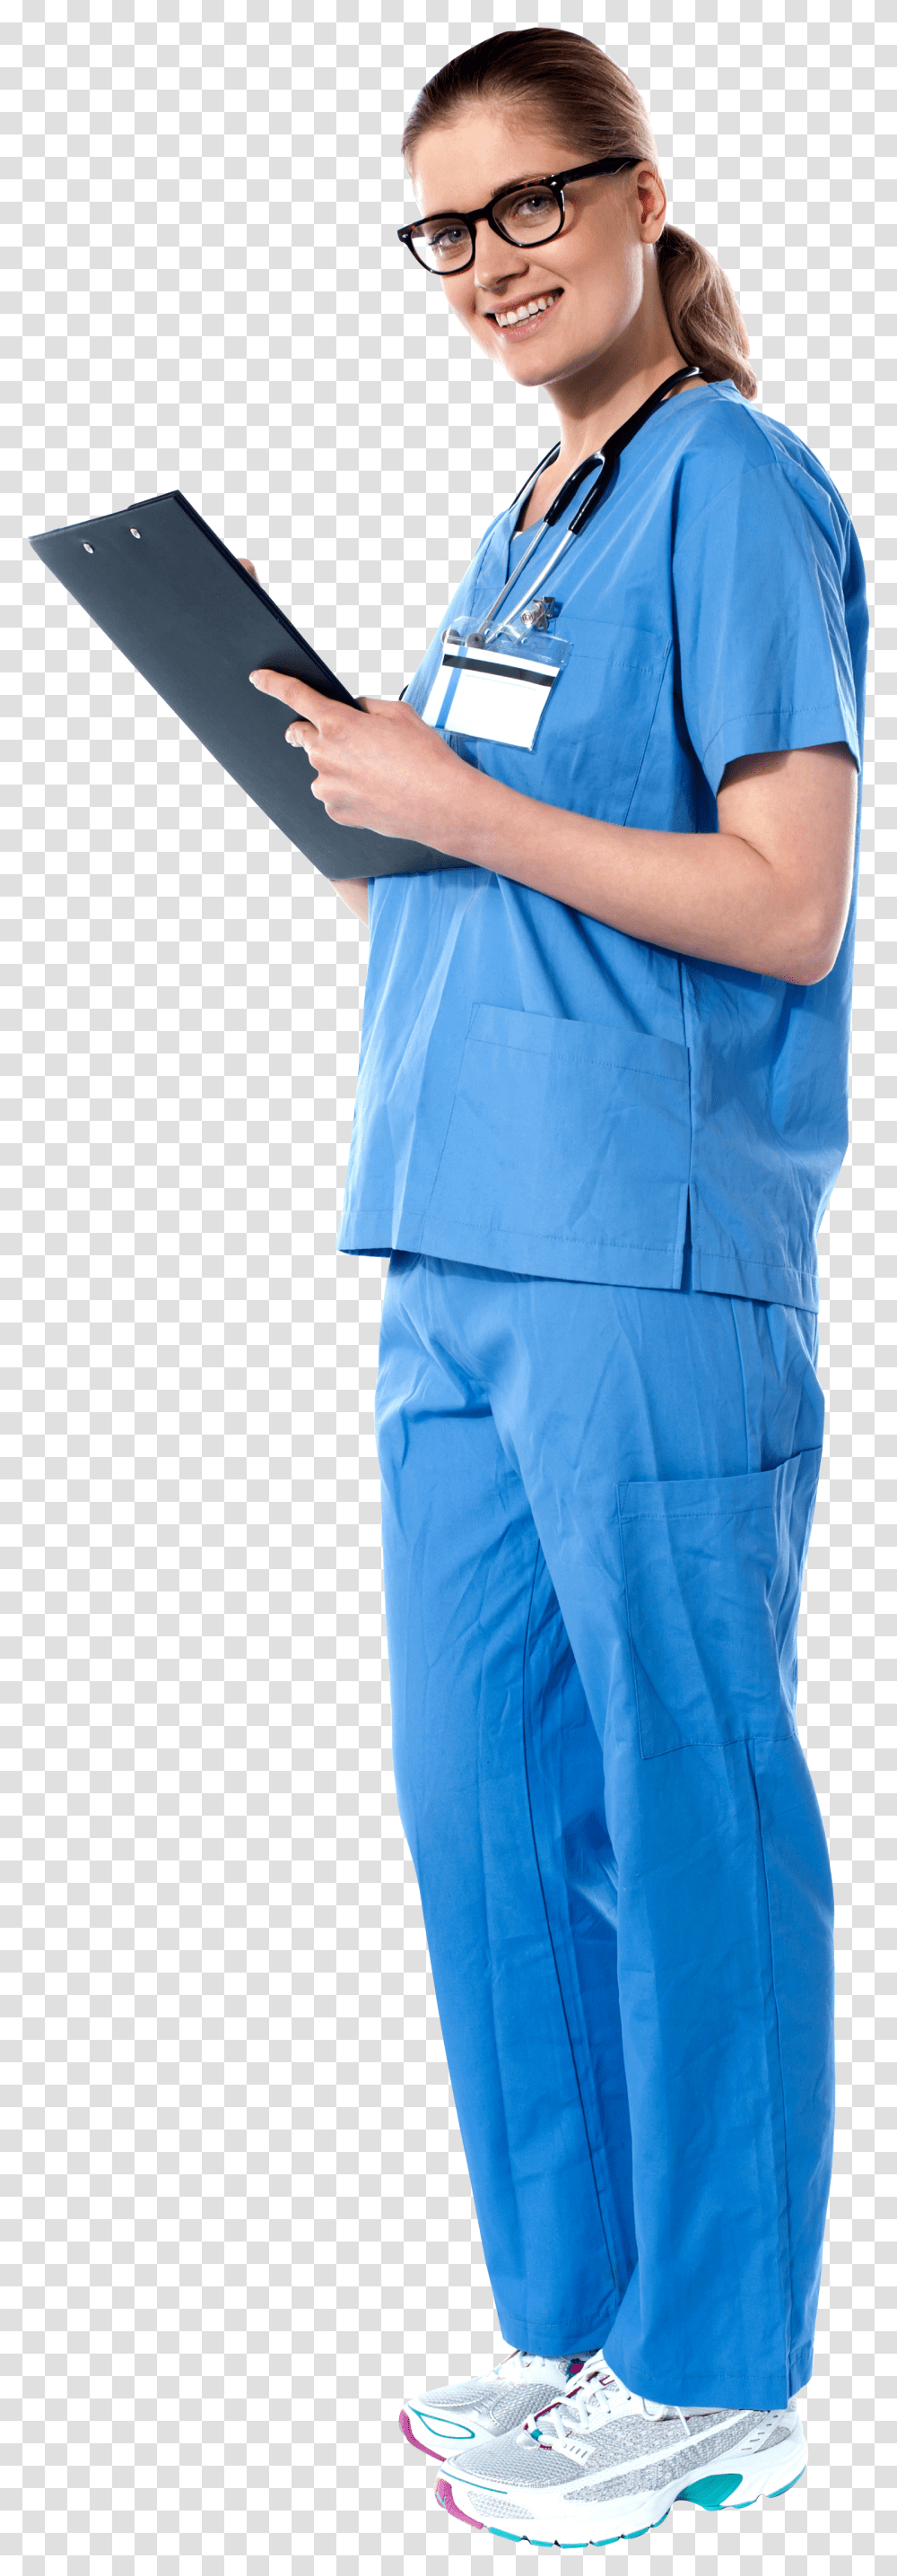 Women Doctor Lady Doctor With Stethoscope Transparent Png